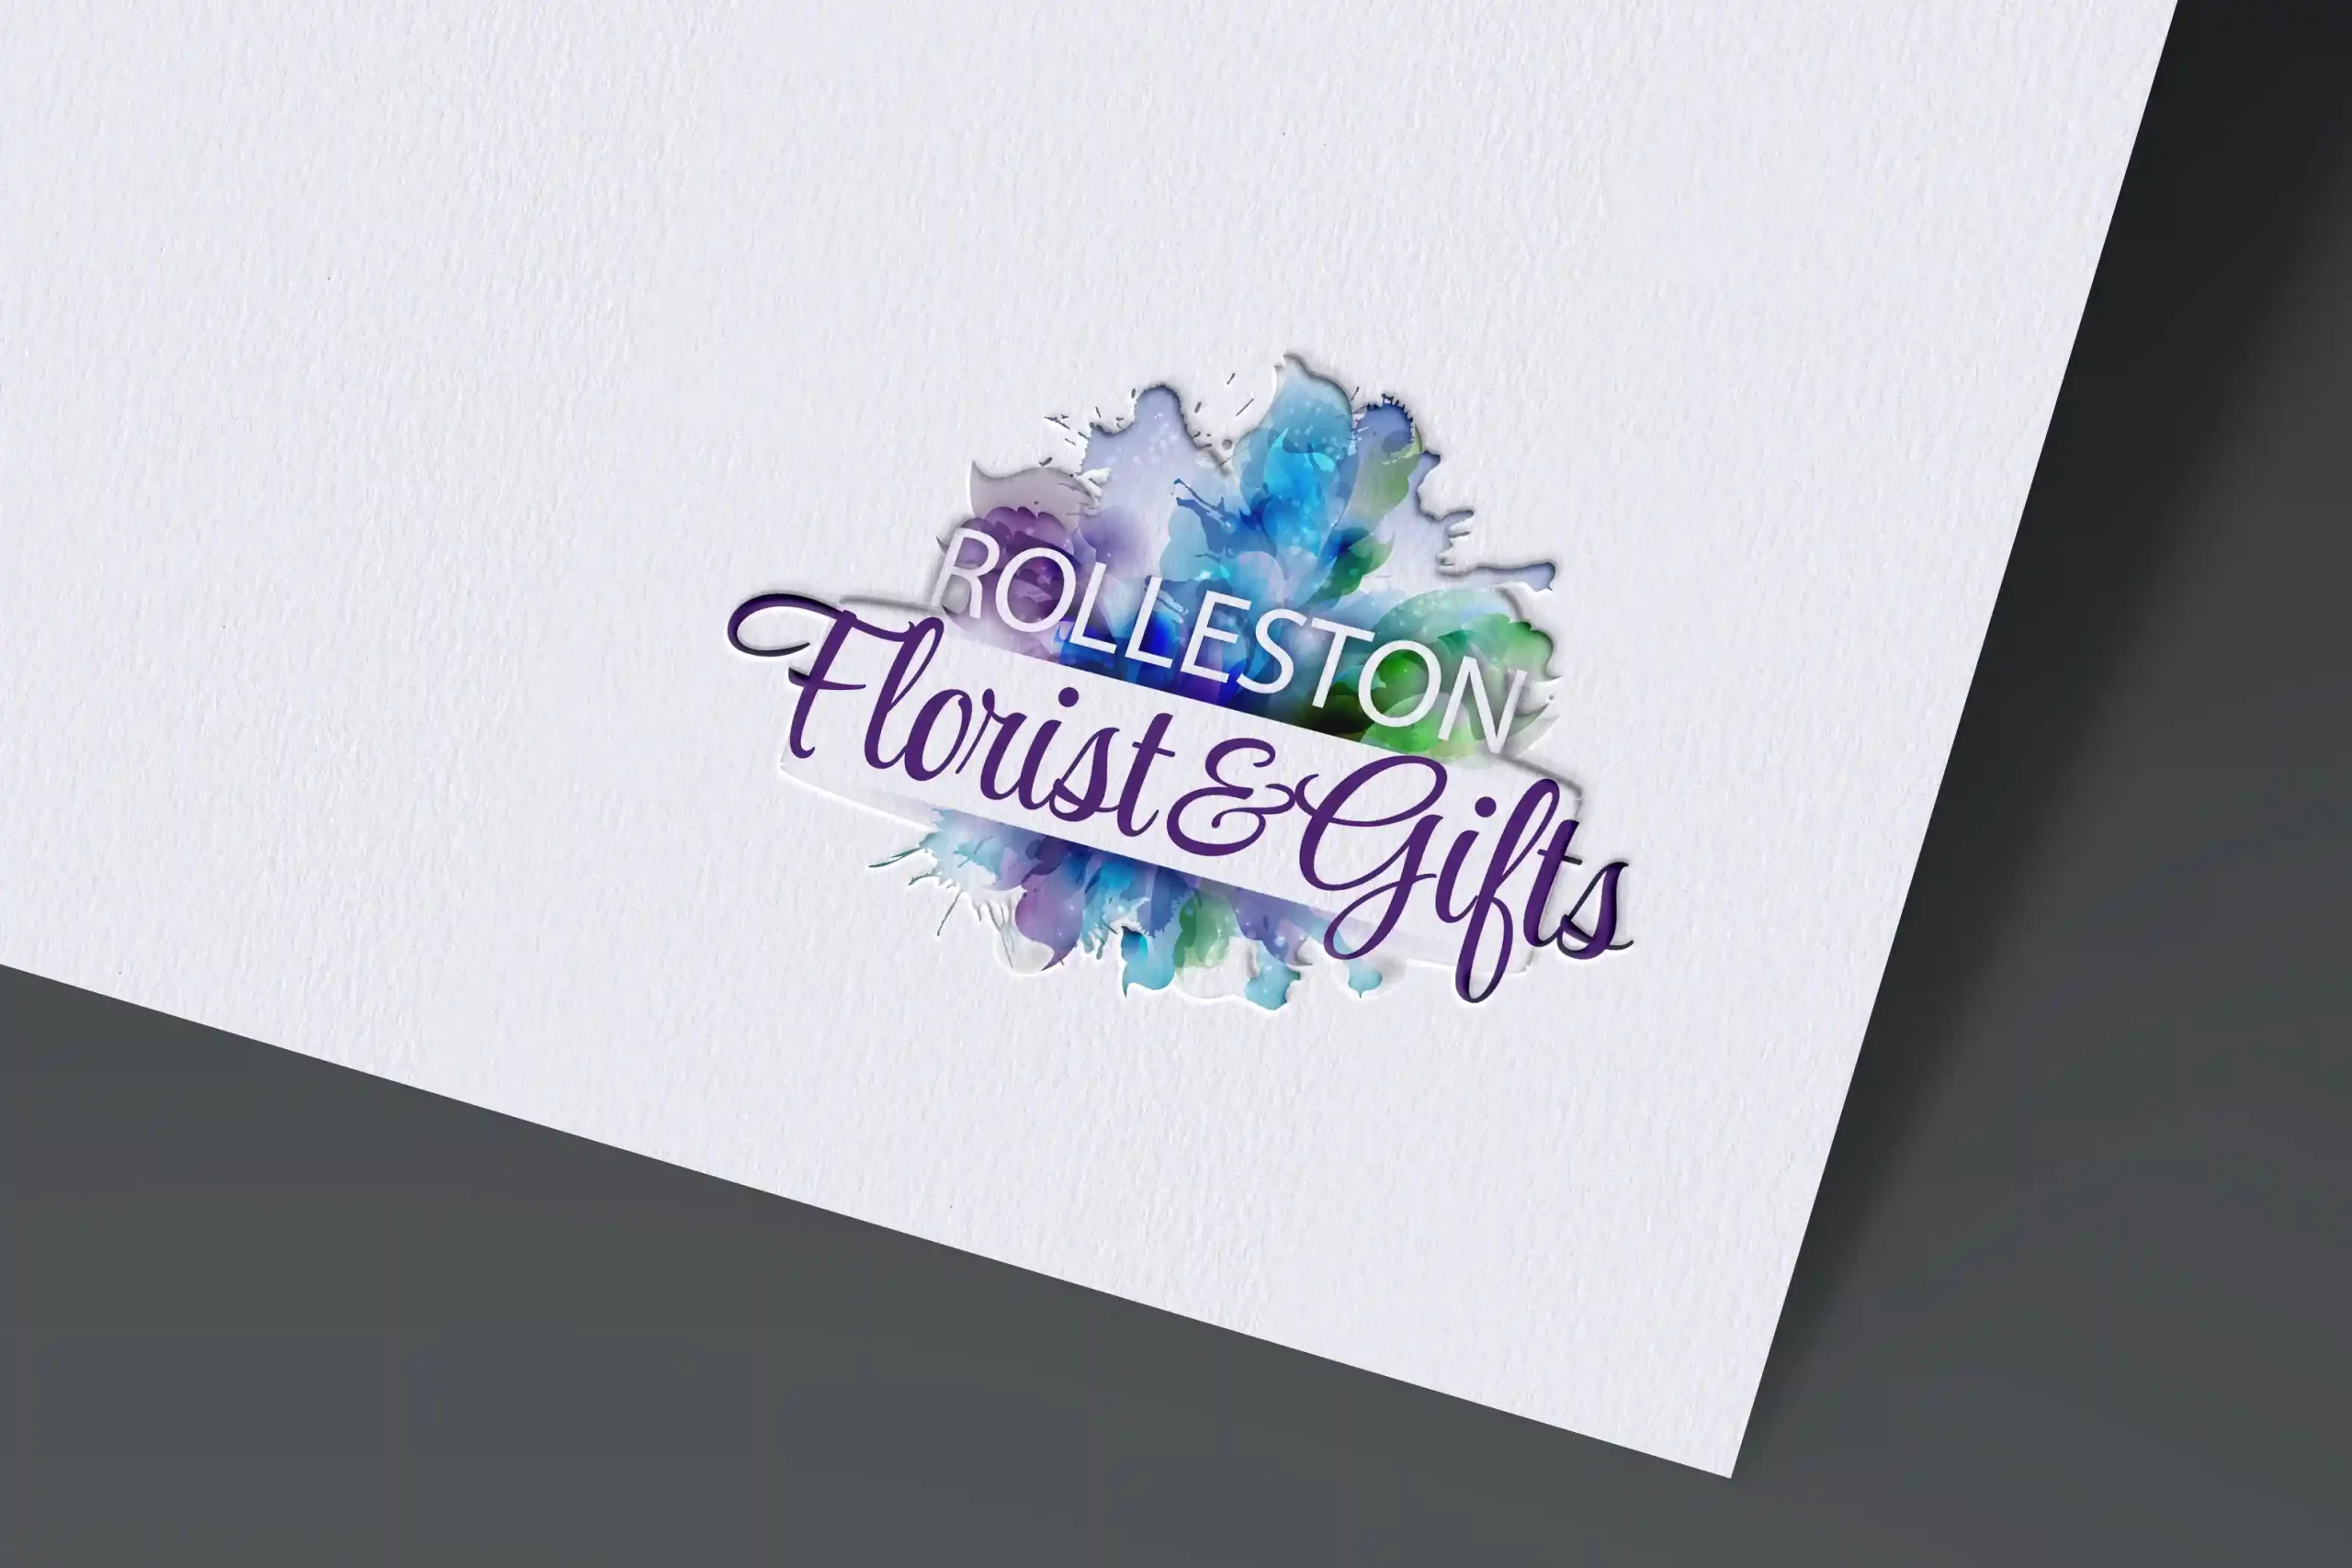 Logo Making made easy for Rolleston Flowers and Gifts in Rolleston Square, South of Christchucrh, Selwyn Canterbury, NZ. A modern elegant flowery-like friendly styled Logo Design made by XDC.NZ, the super experienced, specialist Logo Maker based in Rolleston